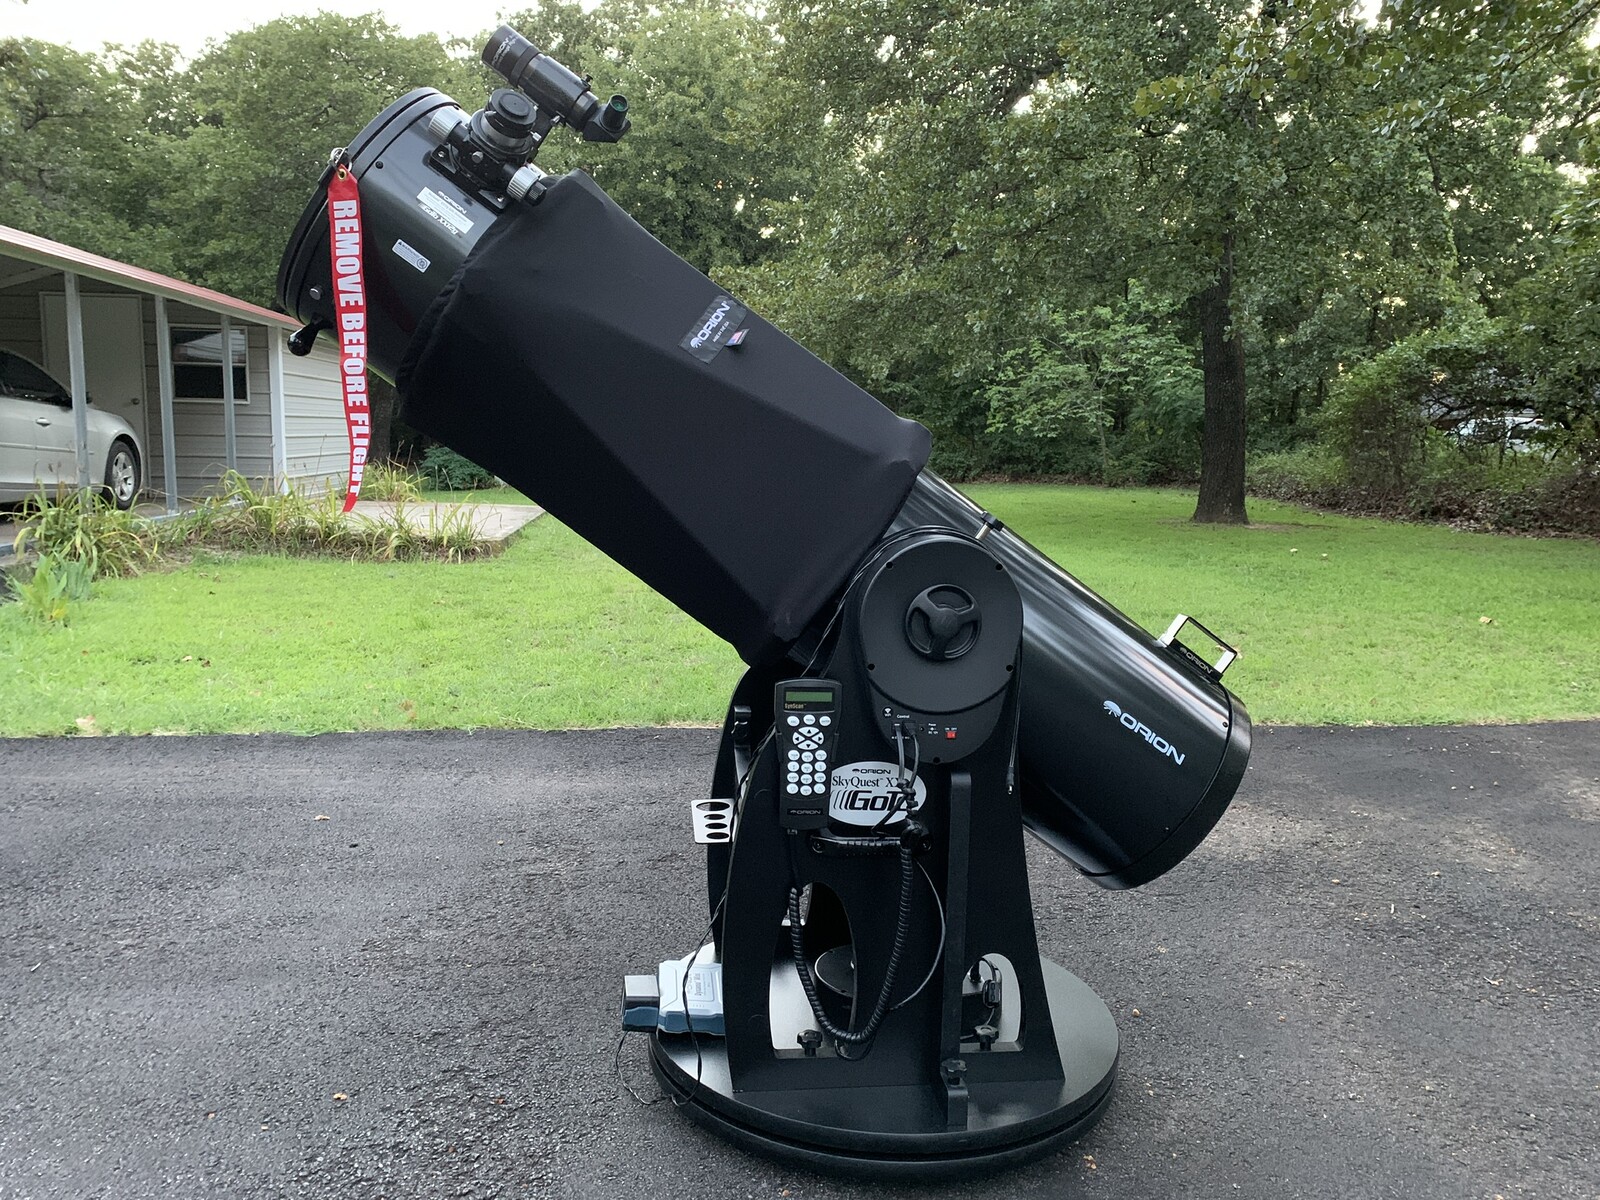 Orion SkyQuest XX12g Truss Tube Dobsonian assembled (Size: Large) - My Used Orion 10148 Skyquest Xx12g Goto Truss Tube Dobsonian Telescope